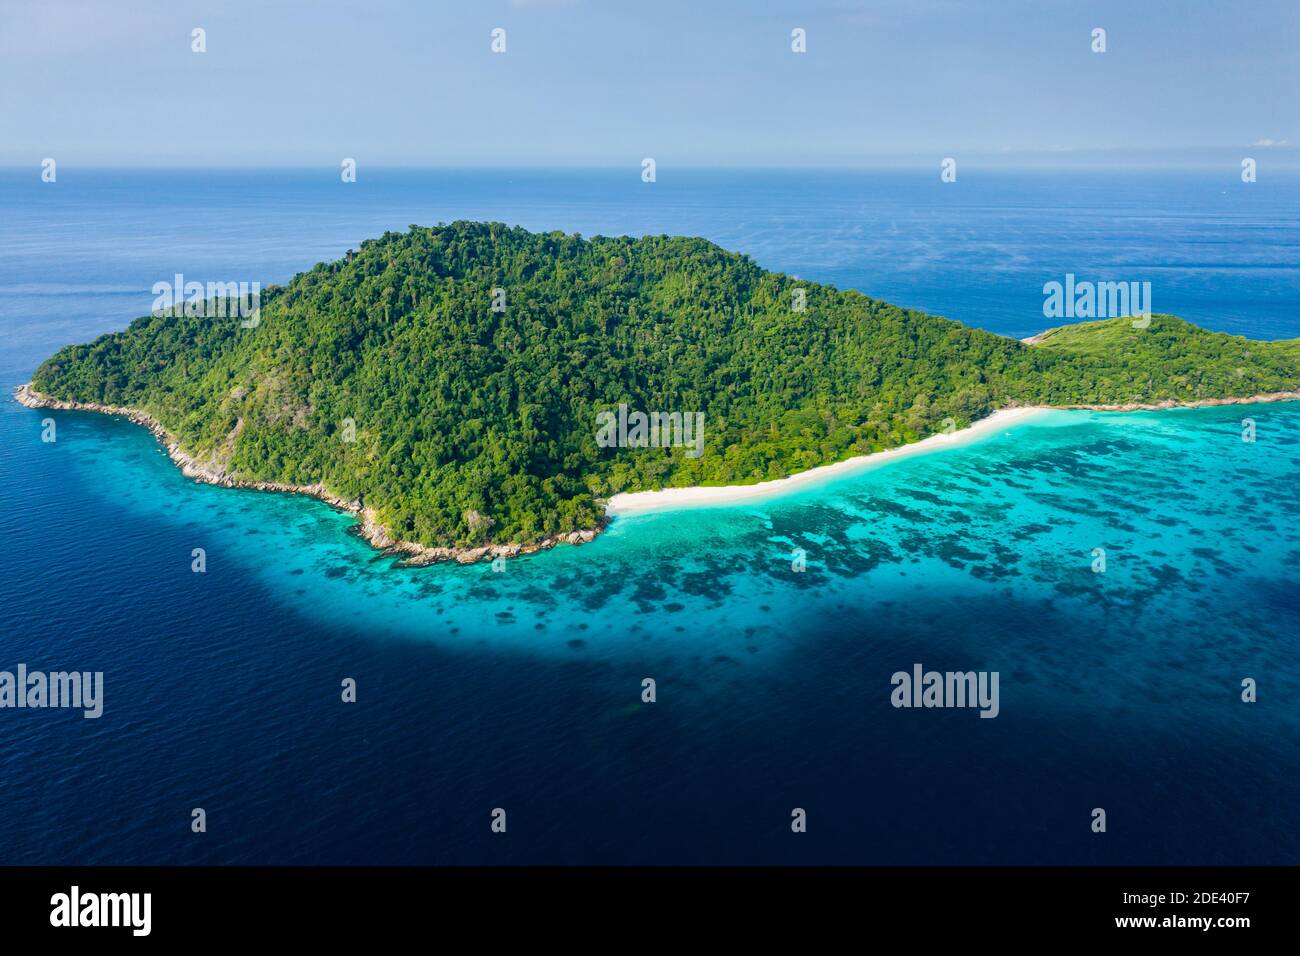 Aerial view of an empty beach on a beautiful tropical island surrounded by clear water and a coral reef (Andaman Sea) Stock Photo